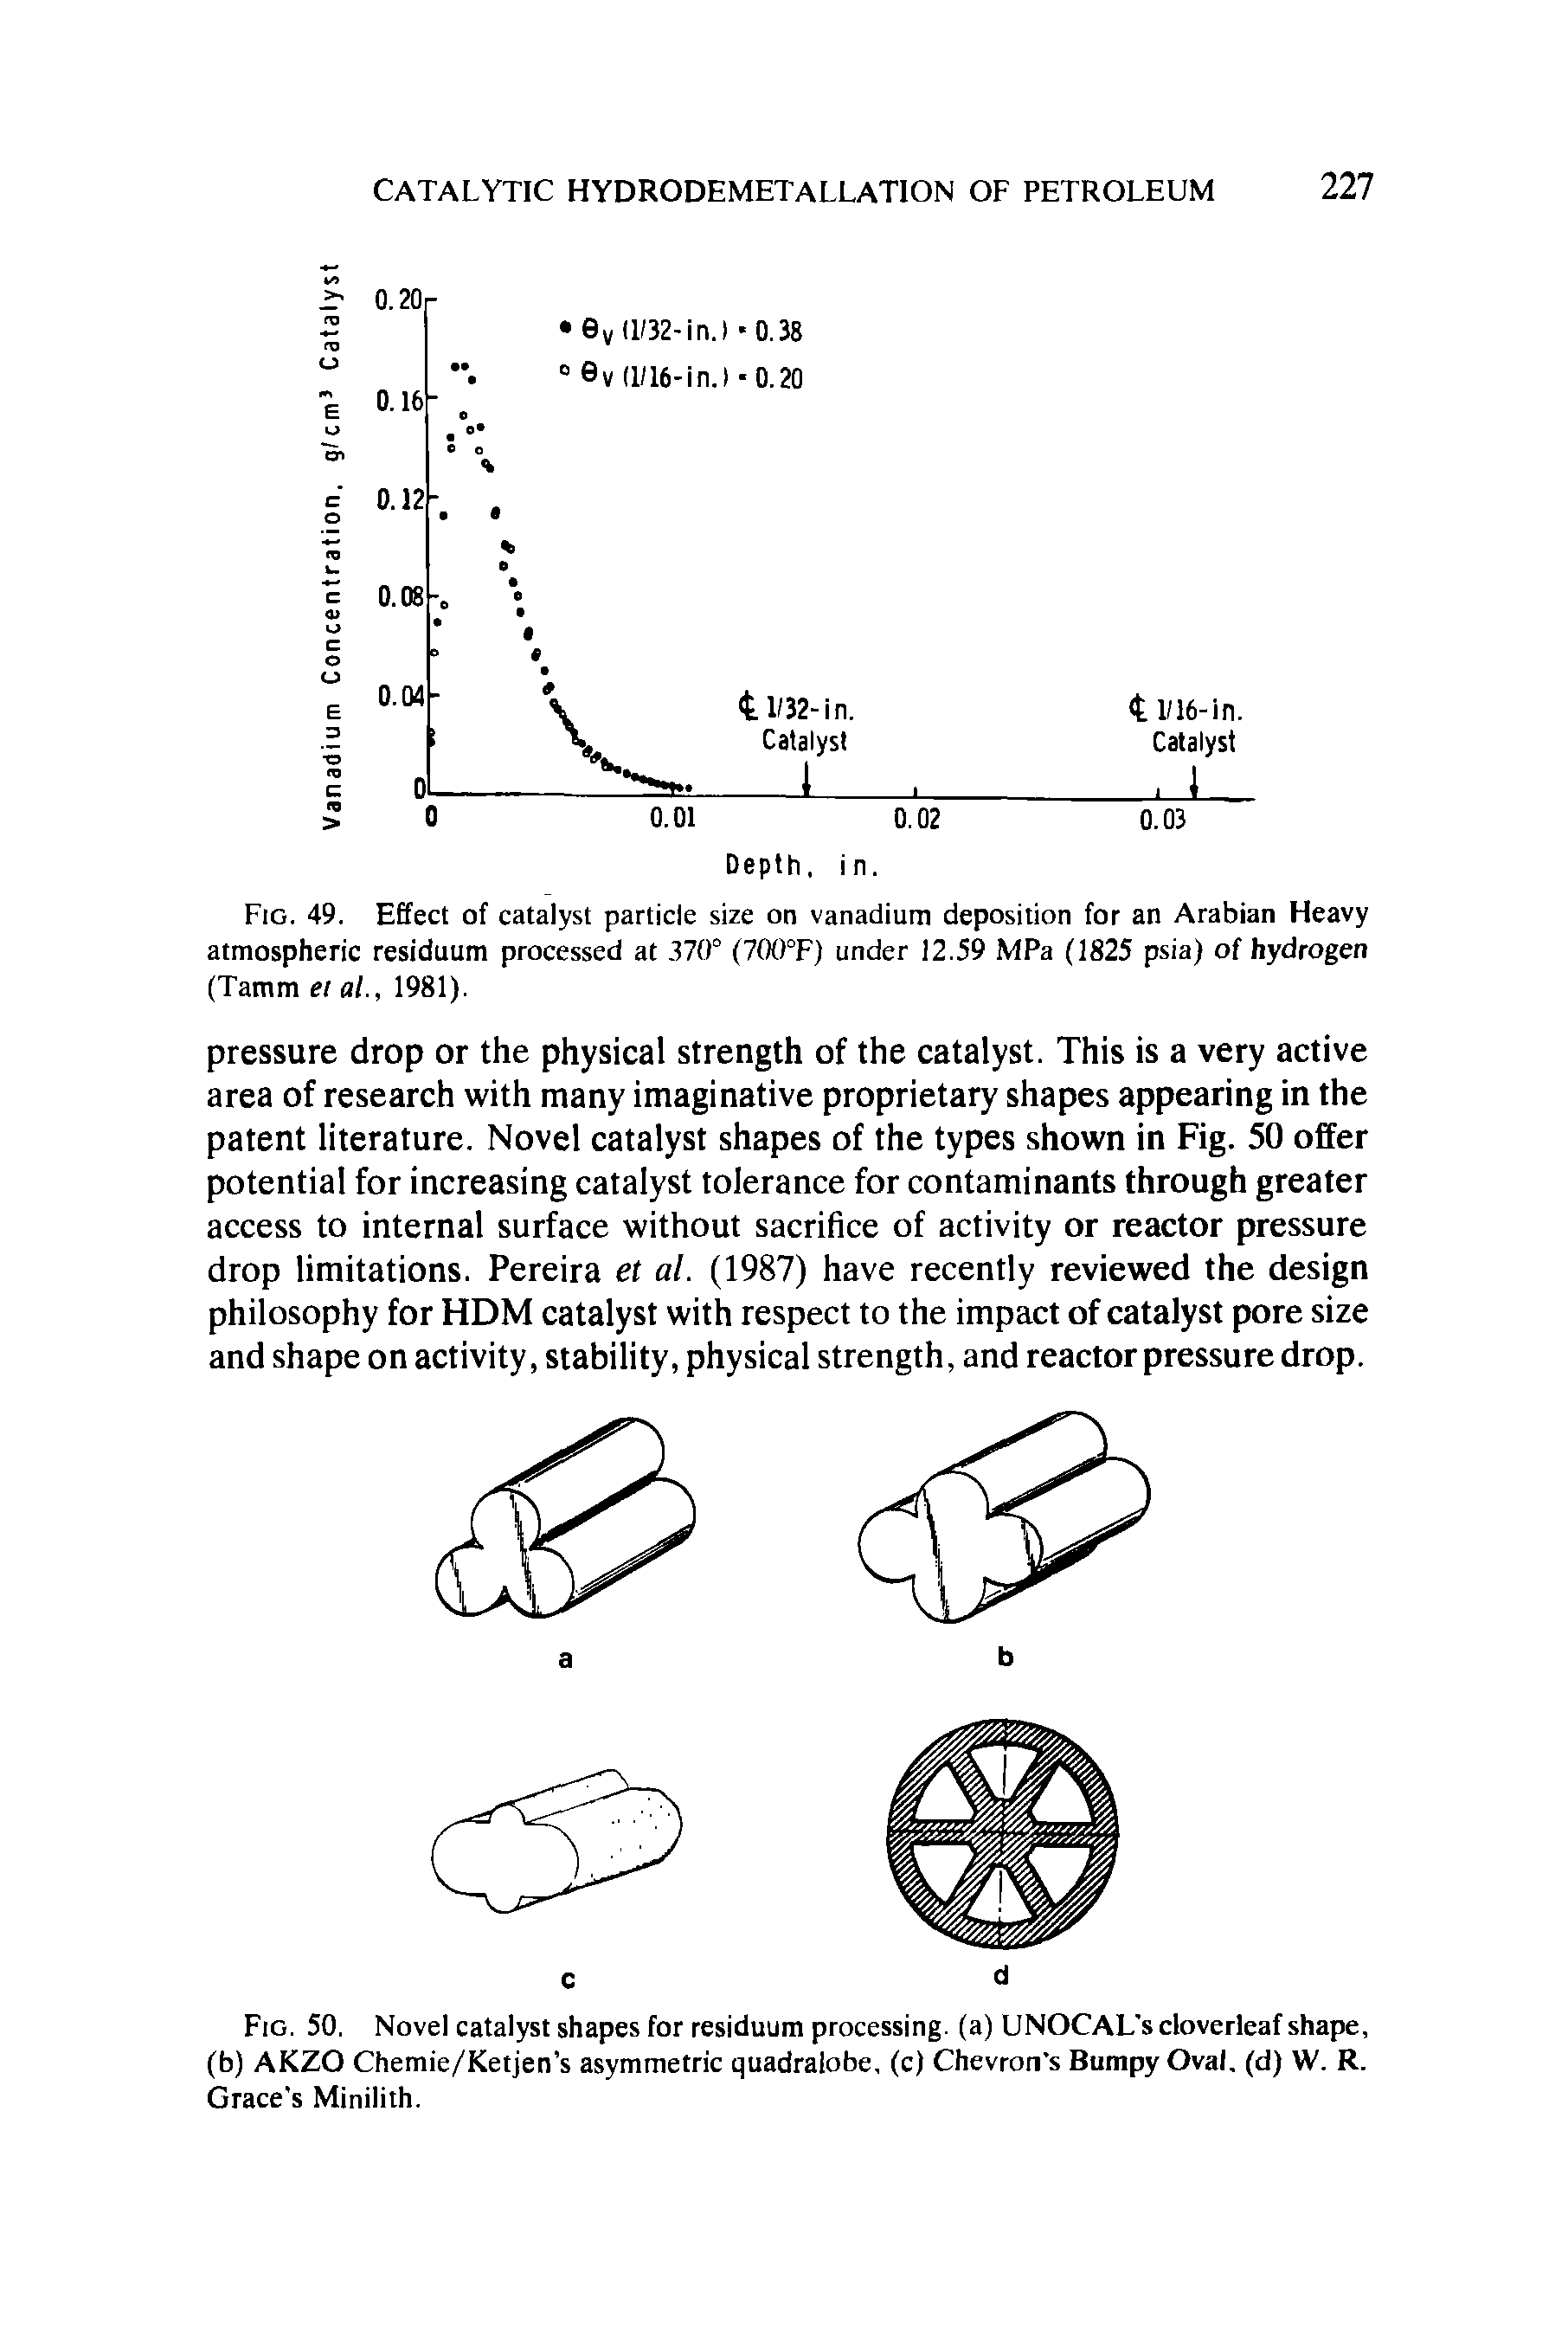 Fig. 49. Effect of catalyst particle size on vanadium deposition for an Arabian Heavy atmospheric residuum processed at 370° (700°F) under 12.59 MPa (1825 psia) of hydrogen (Tamm et al., 1981).